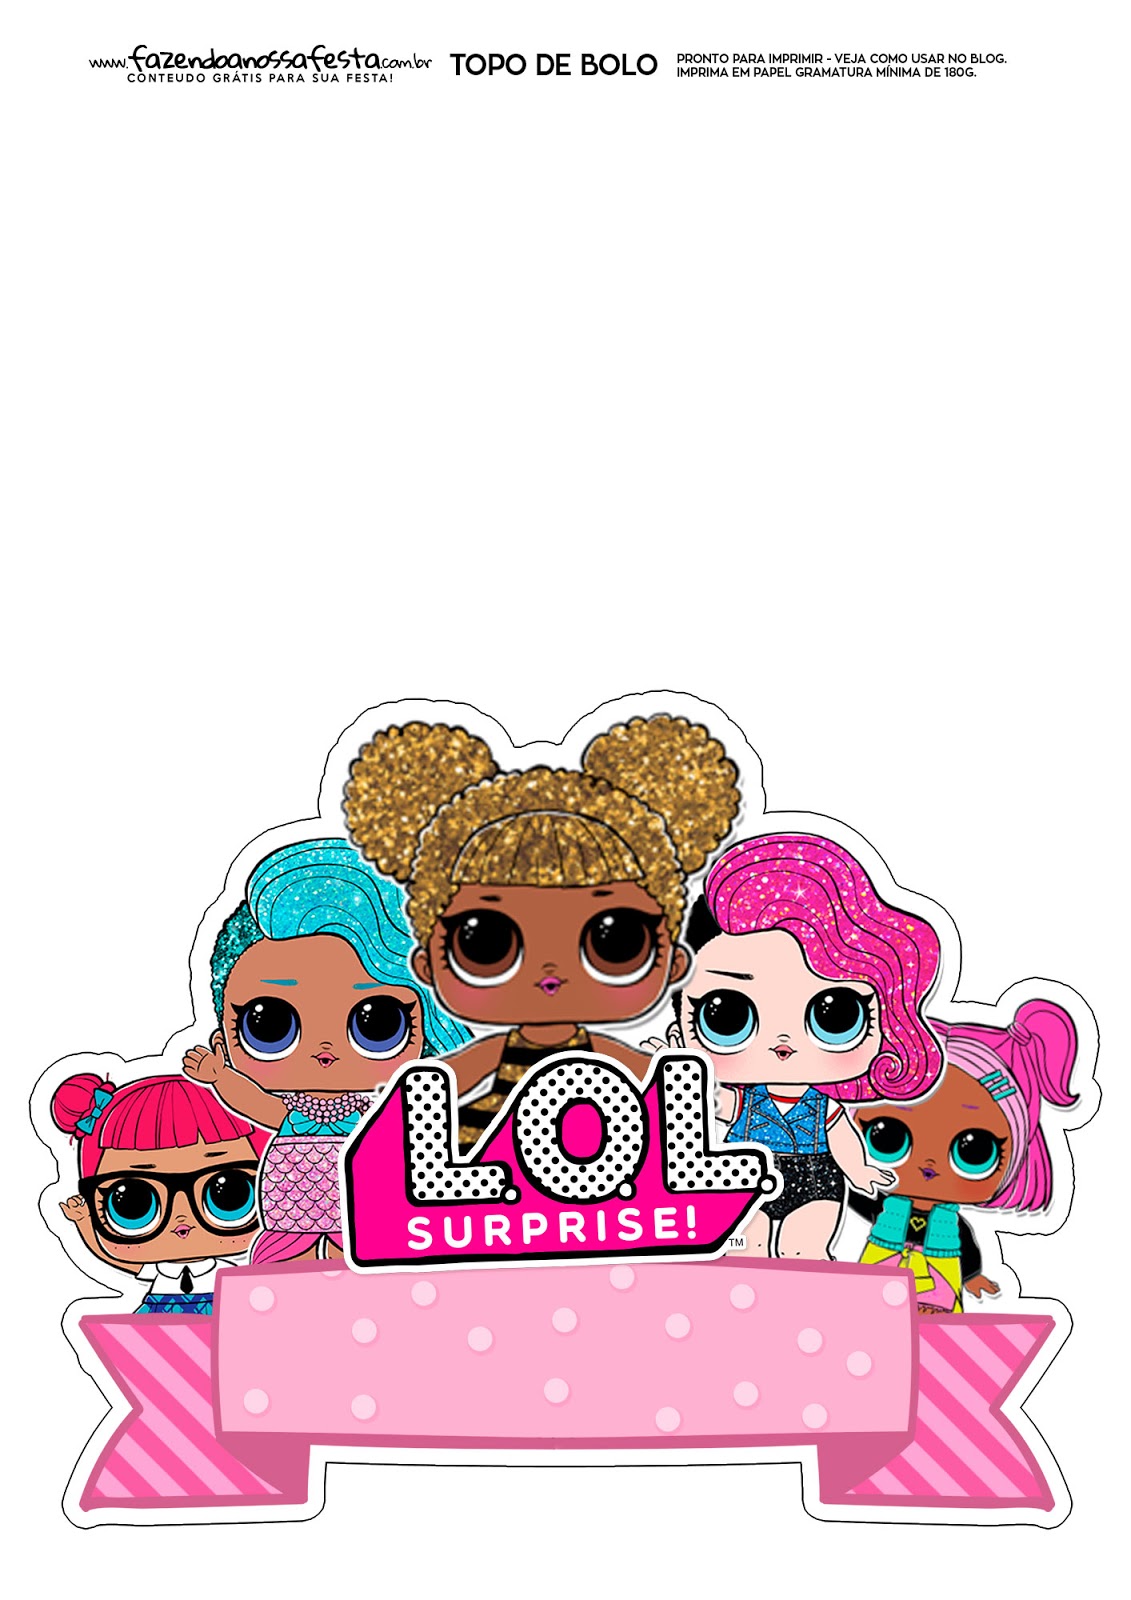 LOL Surprise Birthday: Free Printable Cake Toppers. - Oh My Fiesta! in